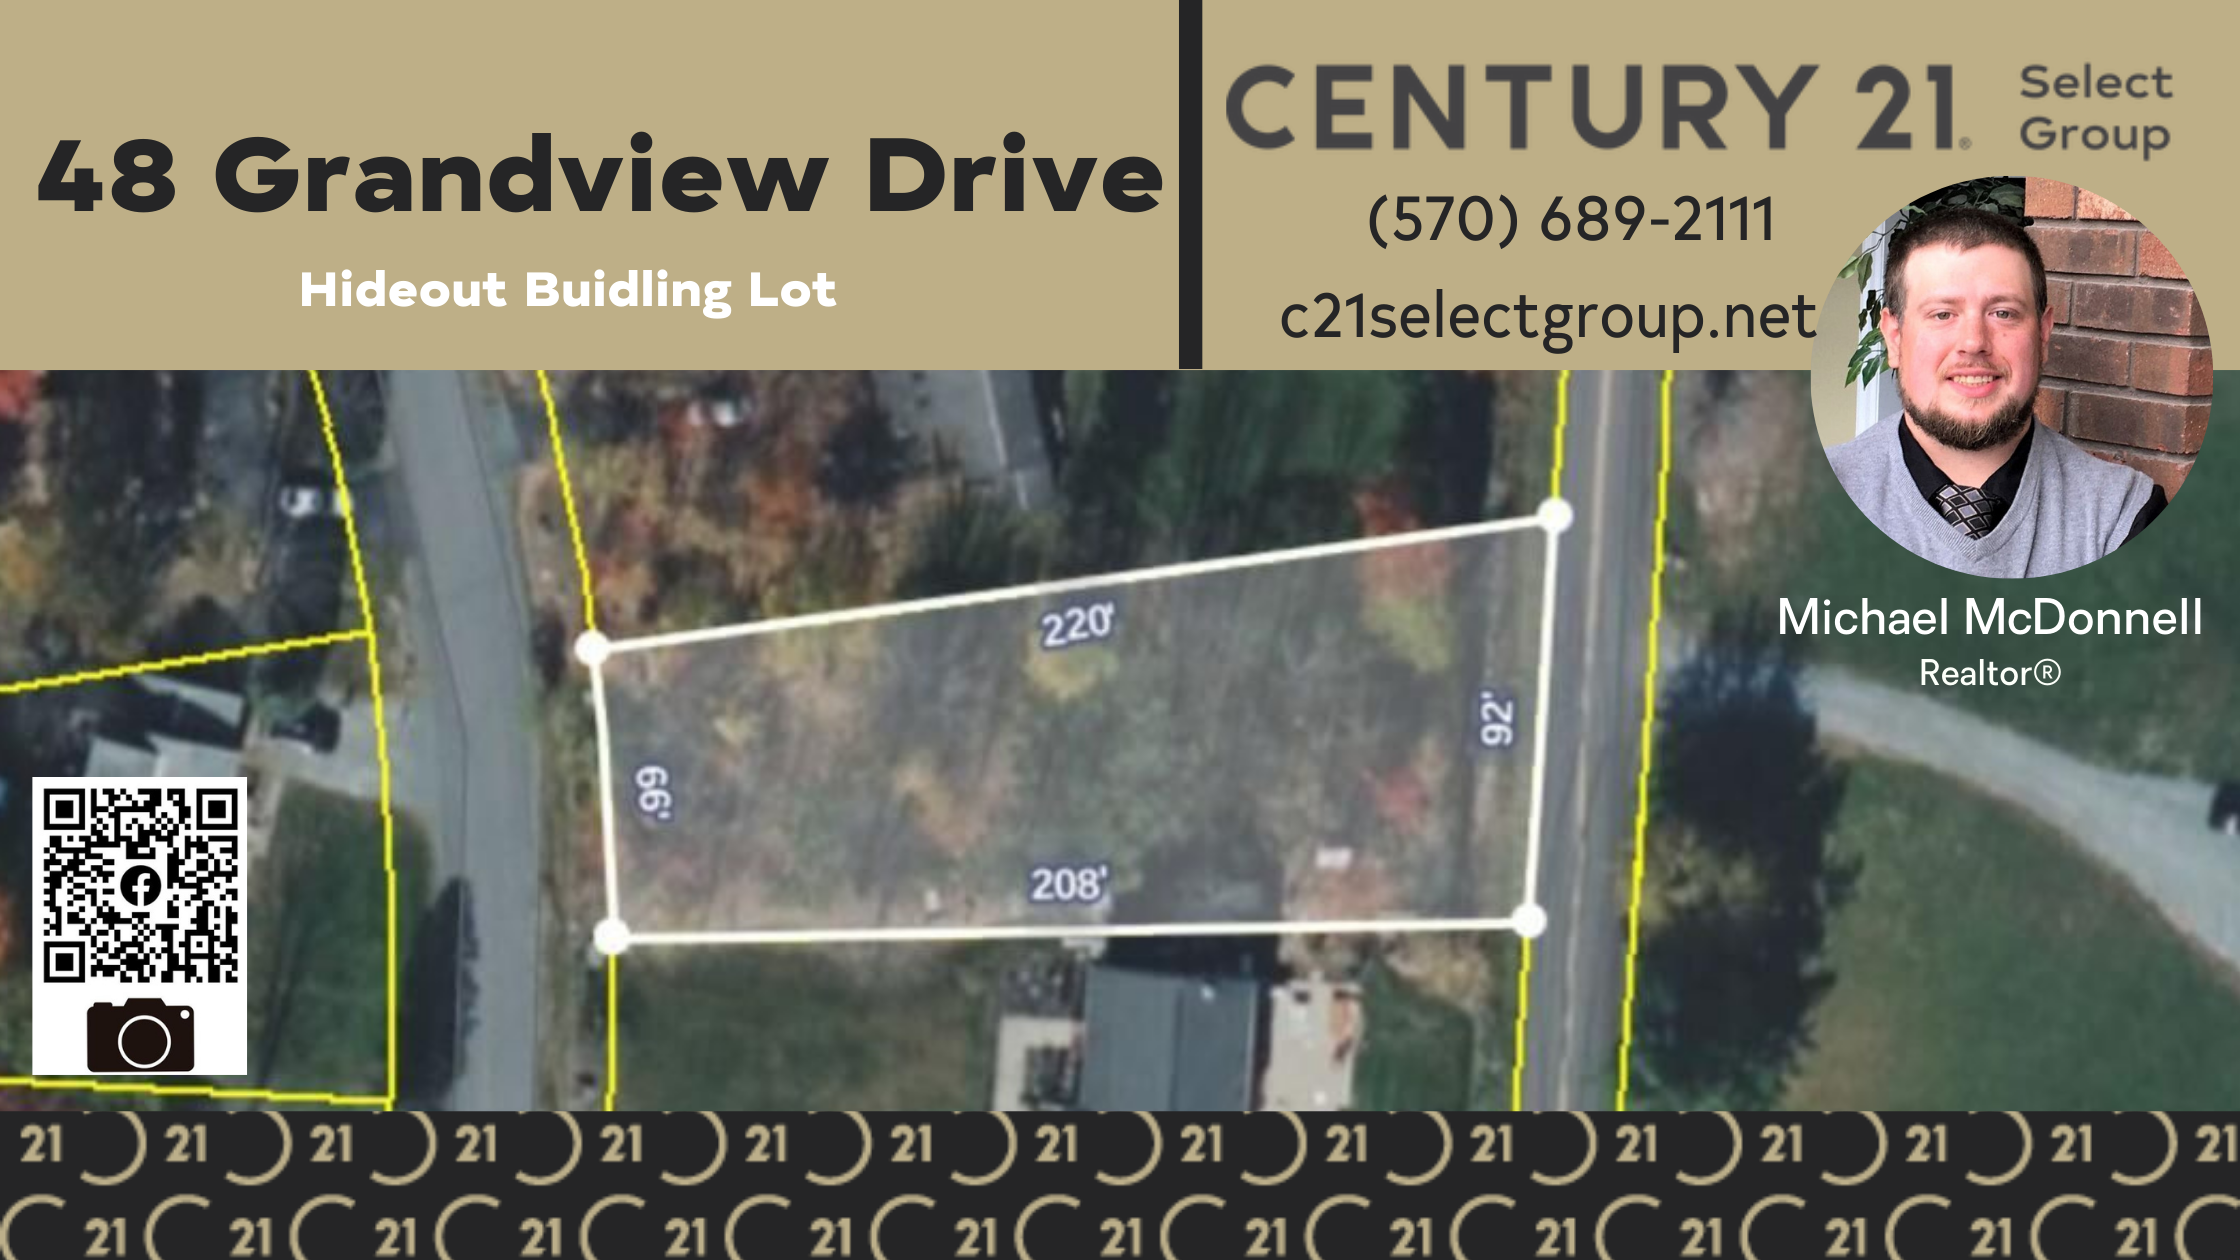 48 Grandview Drive: Building Lot in The Hideout Community